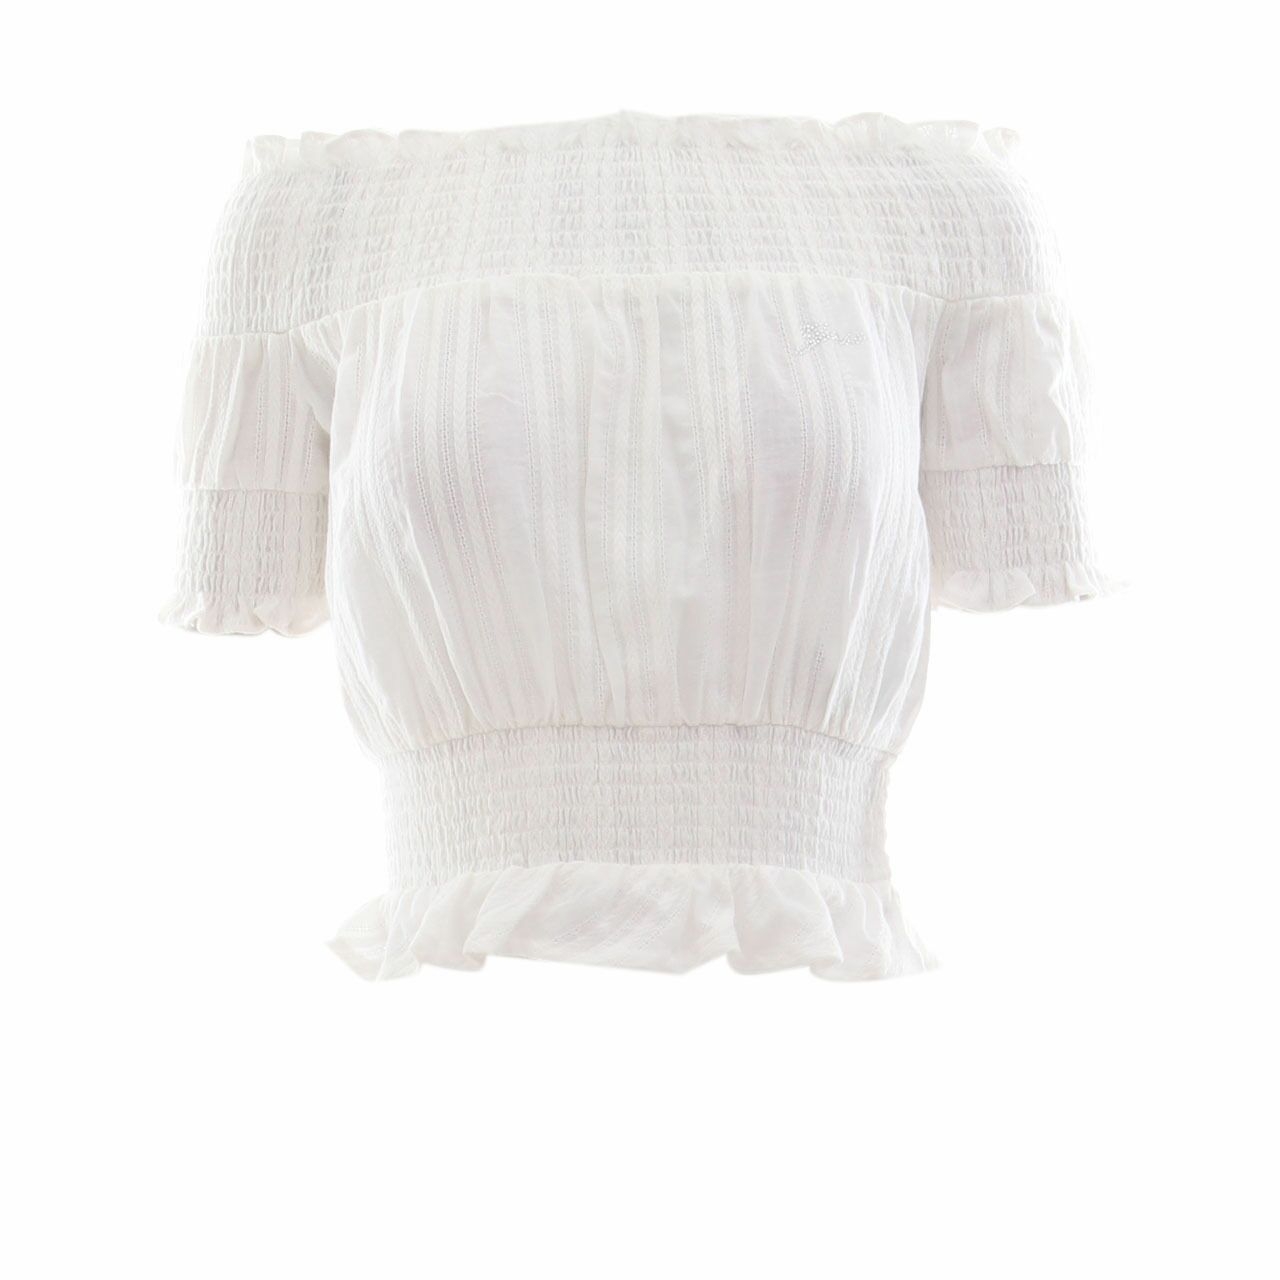 Guess Elasticated White Insert Blouse 